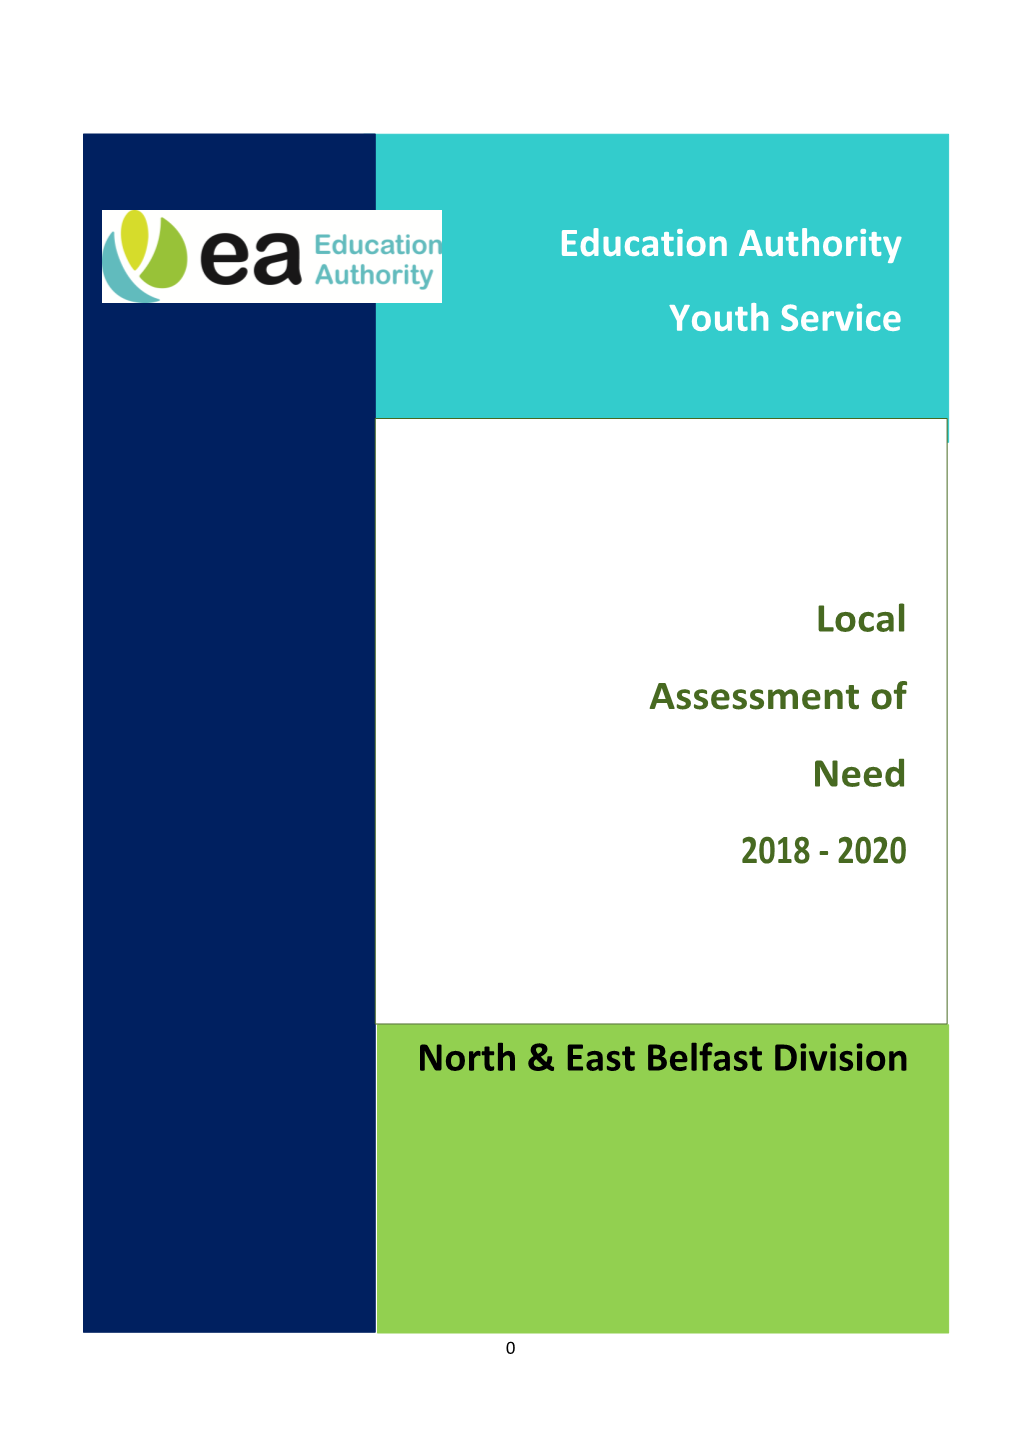 Belfast (North & East) Local Assessment of Need 2018-2020